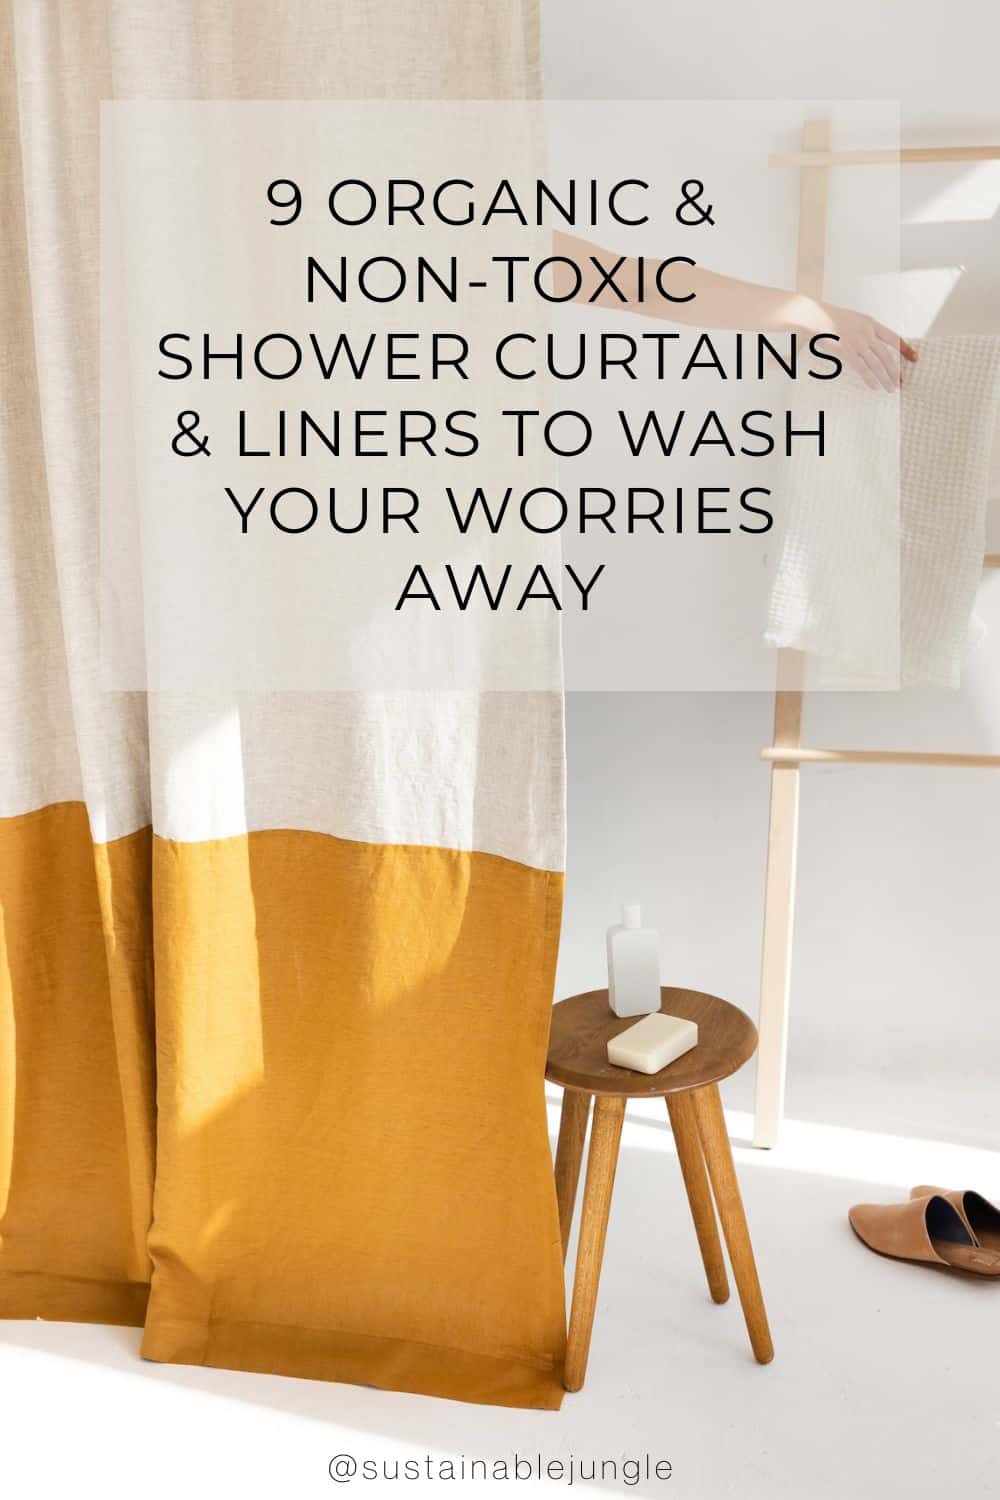 9 Organic & Non-Toxic Shower Curtains & Liners To Wash Your Worries Away Image by Sand Snow Linen #nontoxicshowercurtains #nontoxicshowercurtainliners #organicshowercurtains #bestnontoxicshowercurtains #organiccottonshowercurtains #sustainablejungle